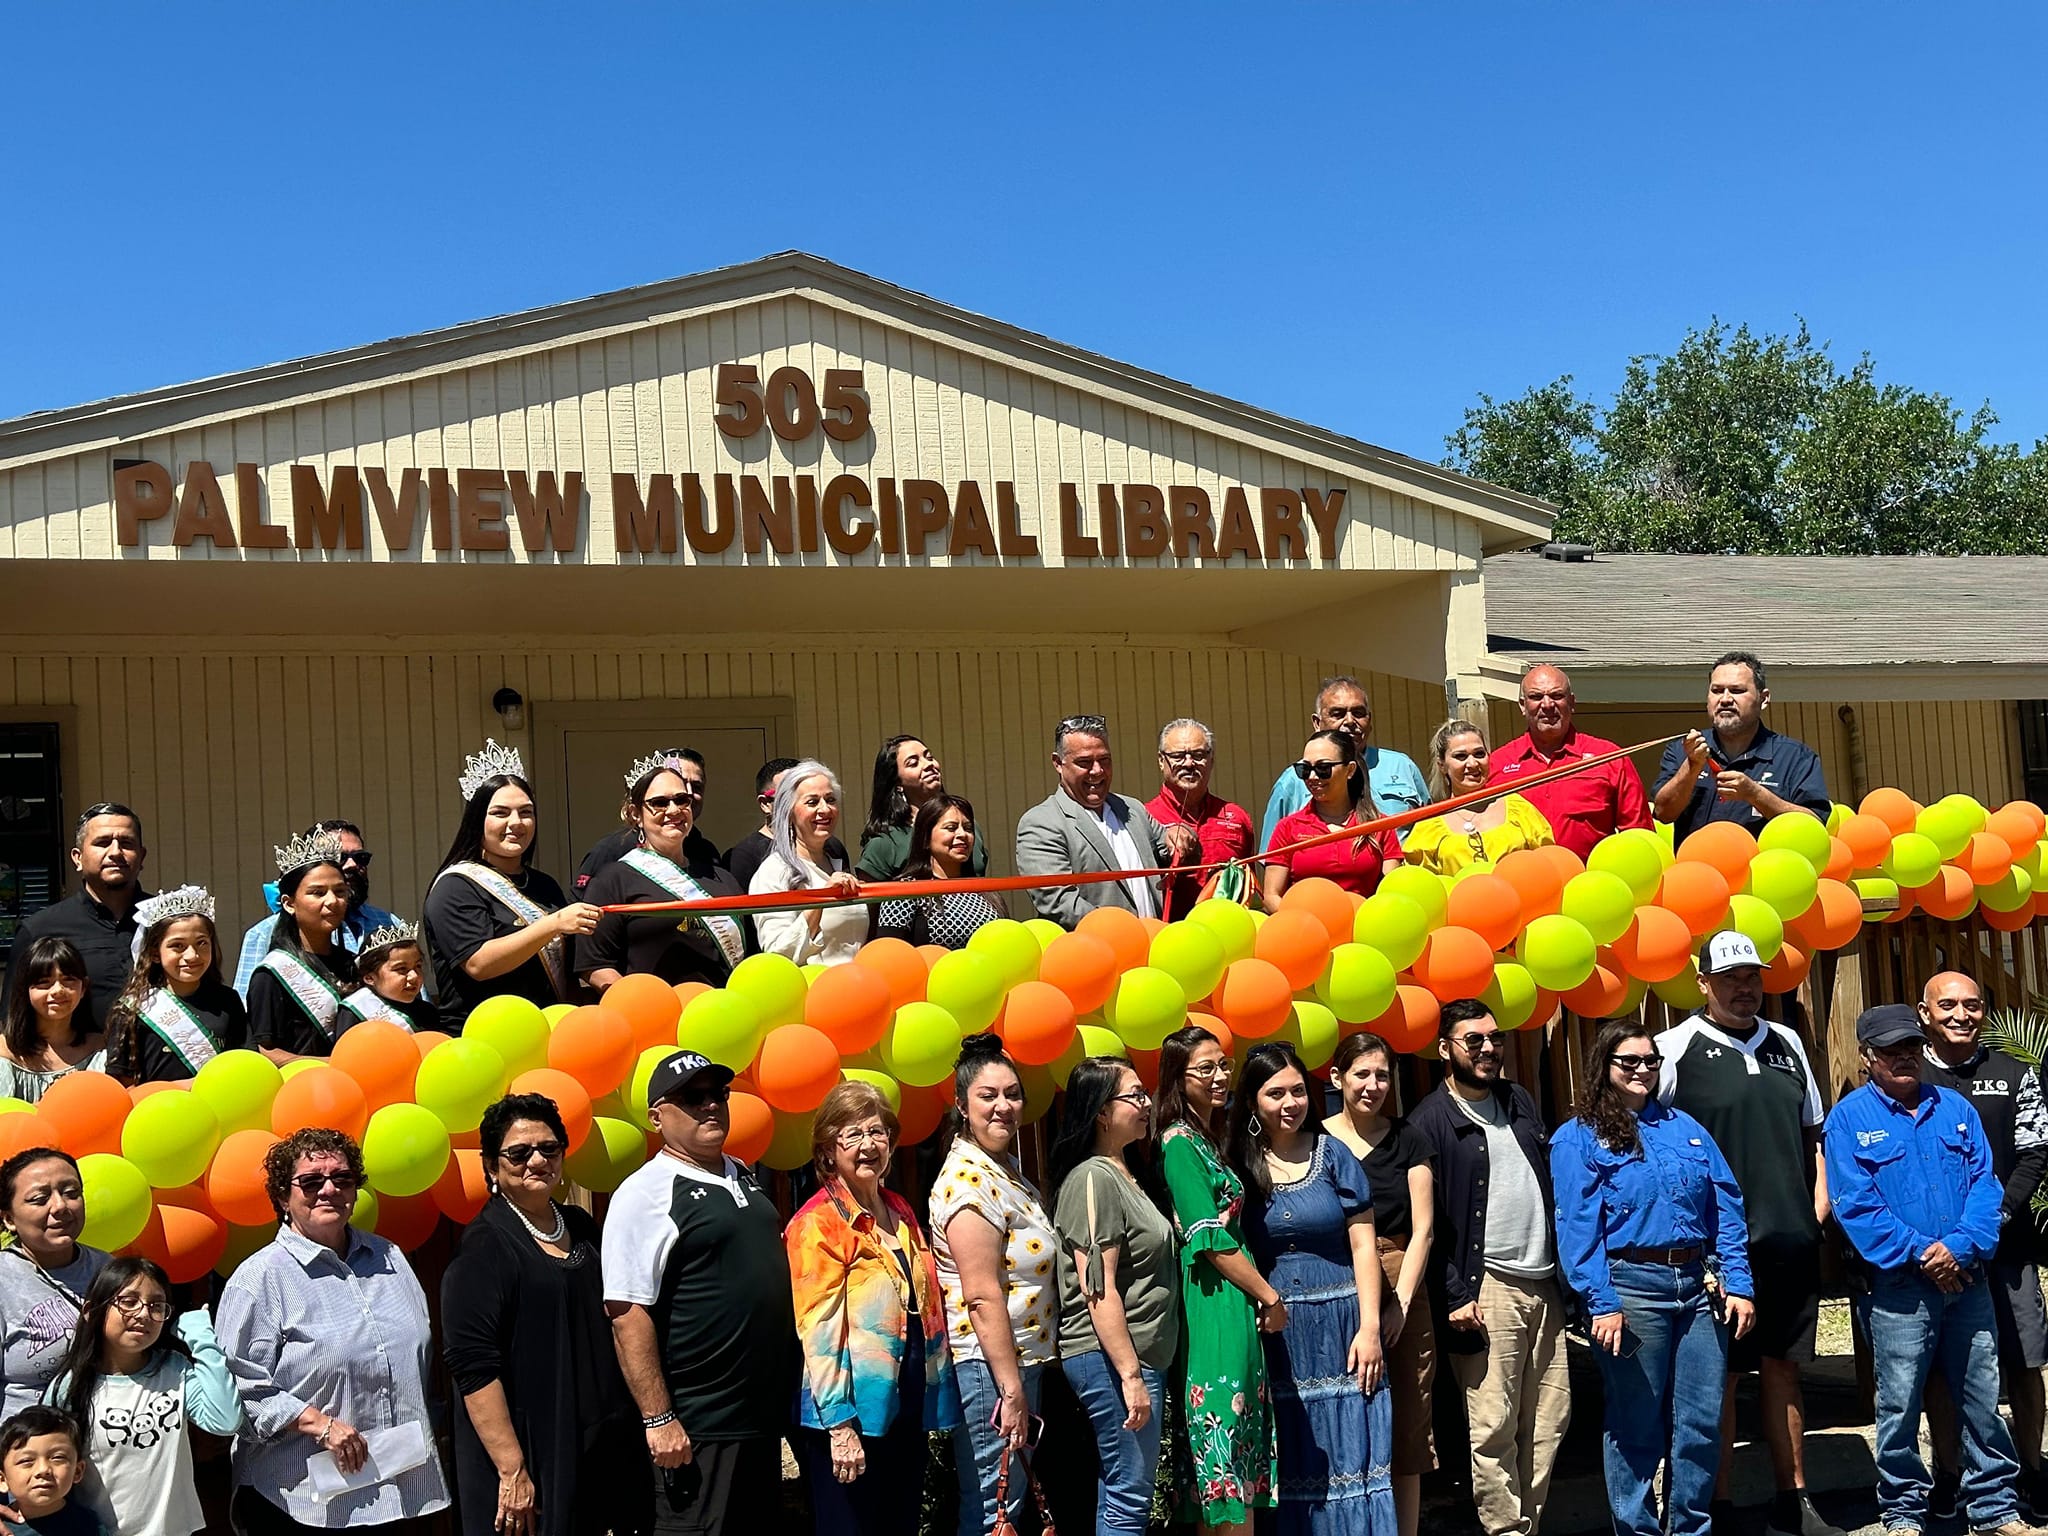 The City of Palmview opened its first municipal library on Saturday